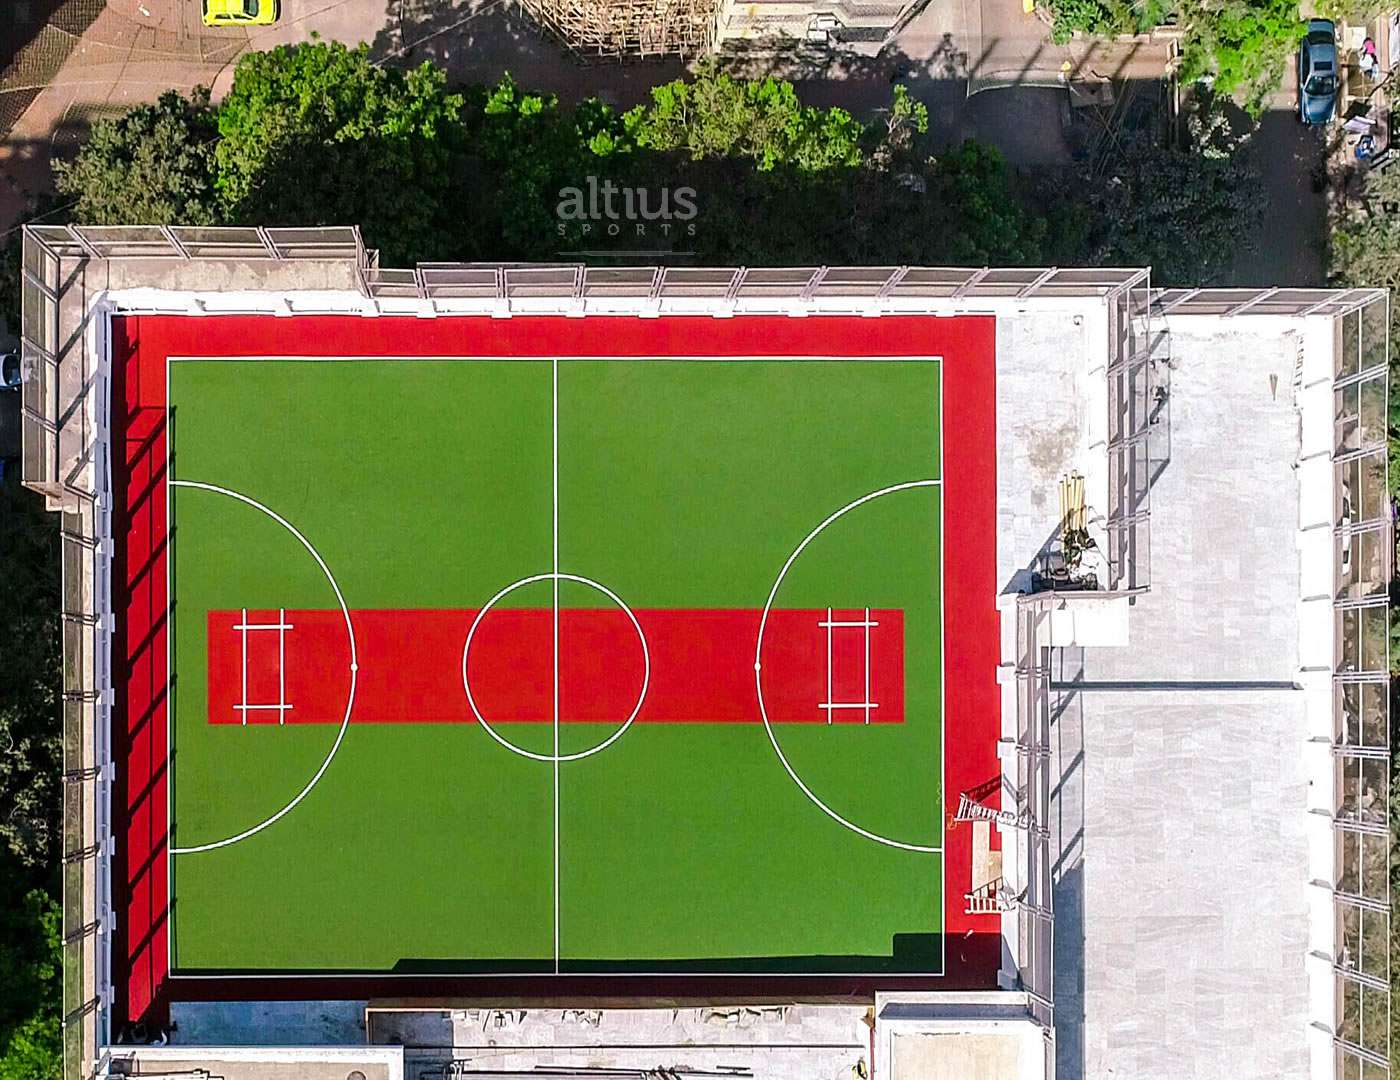 Altius Sports & Leisure Pvt Ltd completes 12 years of providing world class synthetic turf surfaces for sportsgrounds